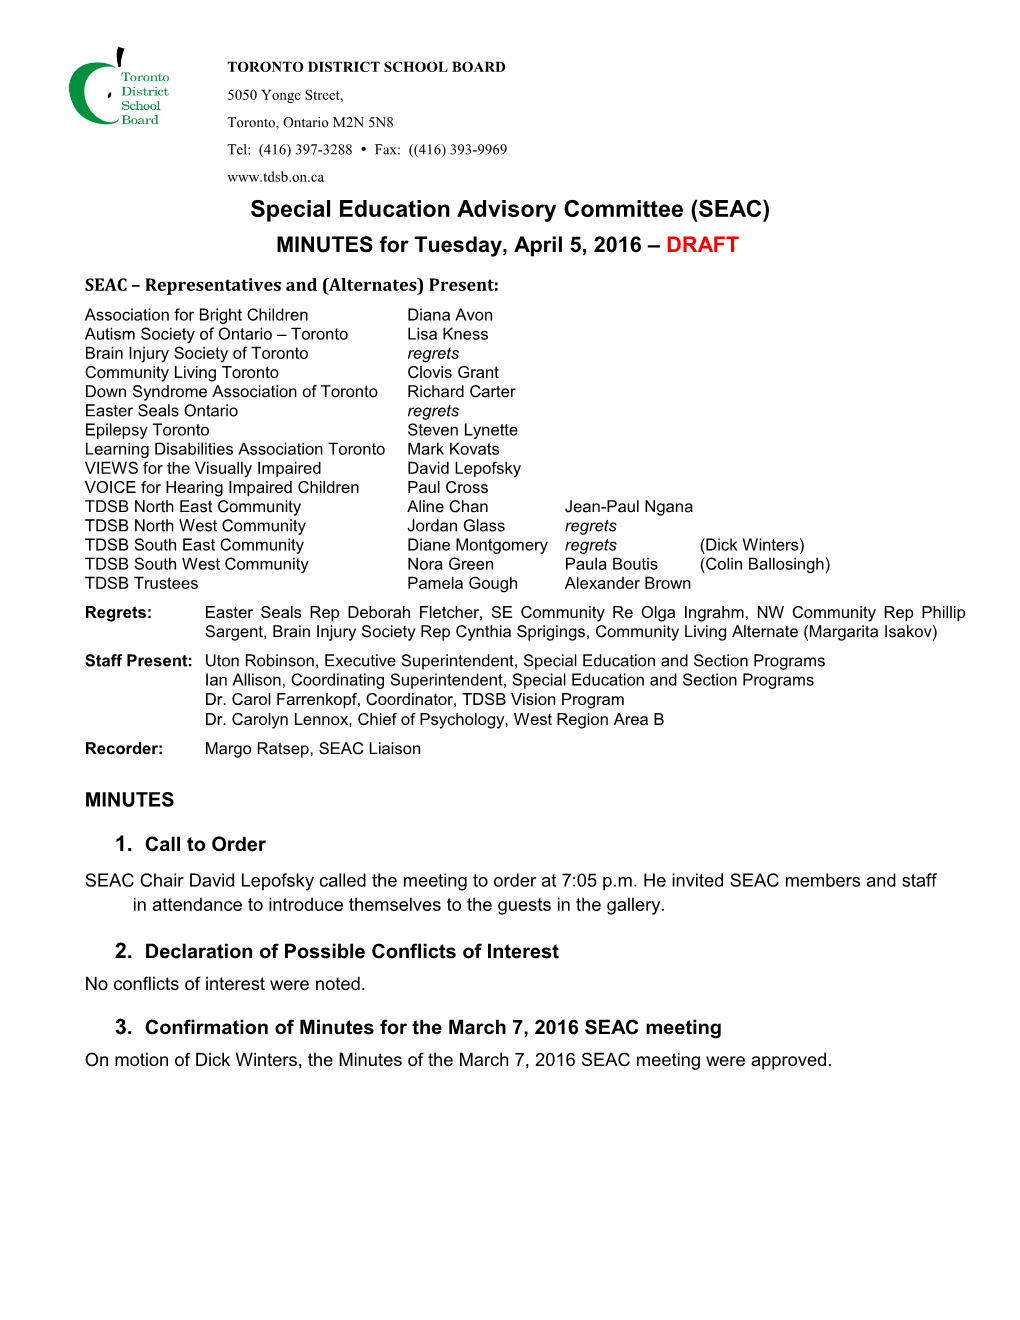 Special Education Advisory Committee (SEAC) s1